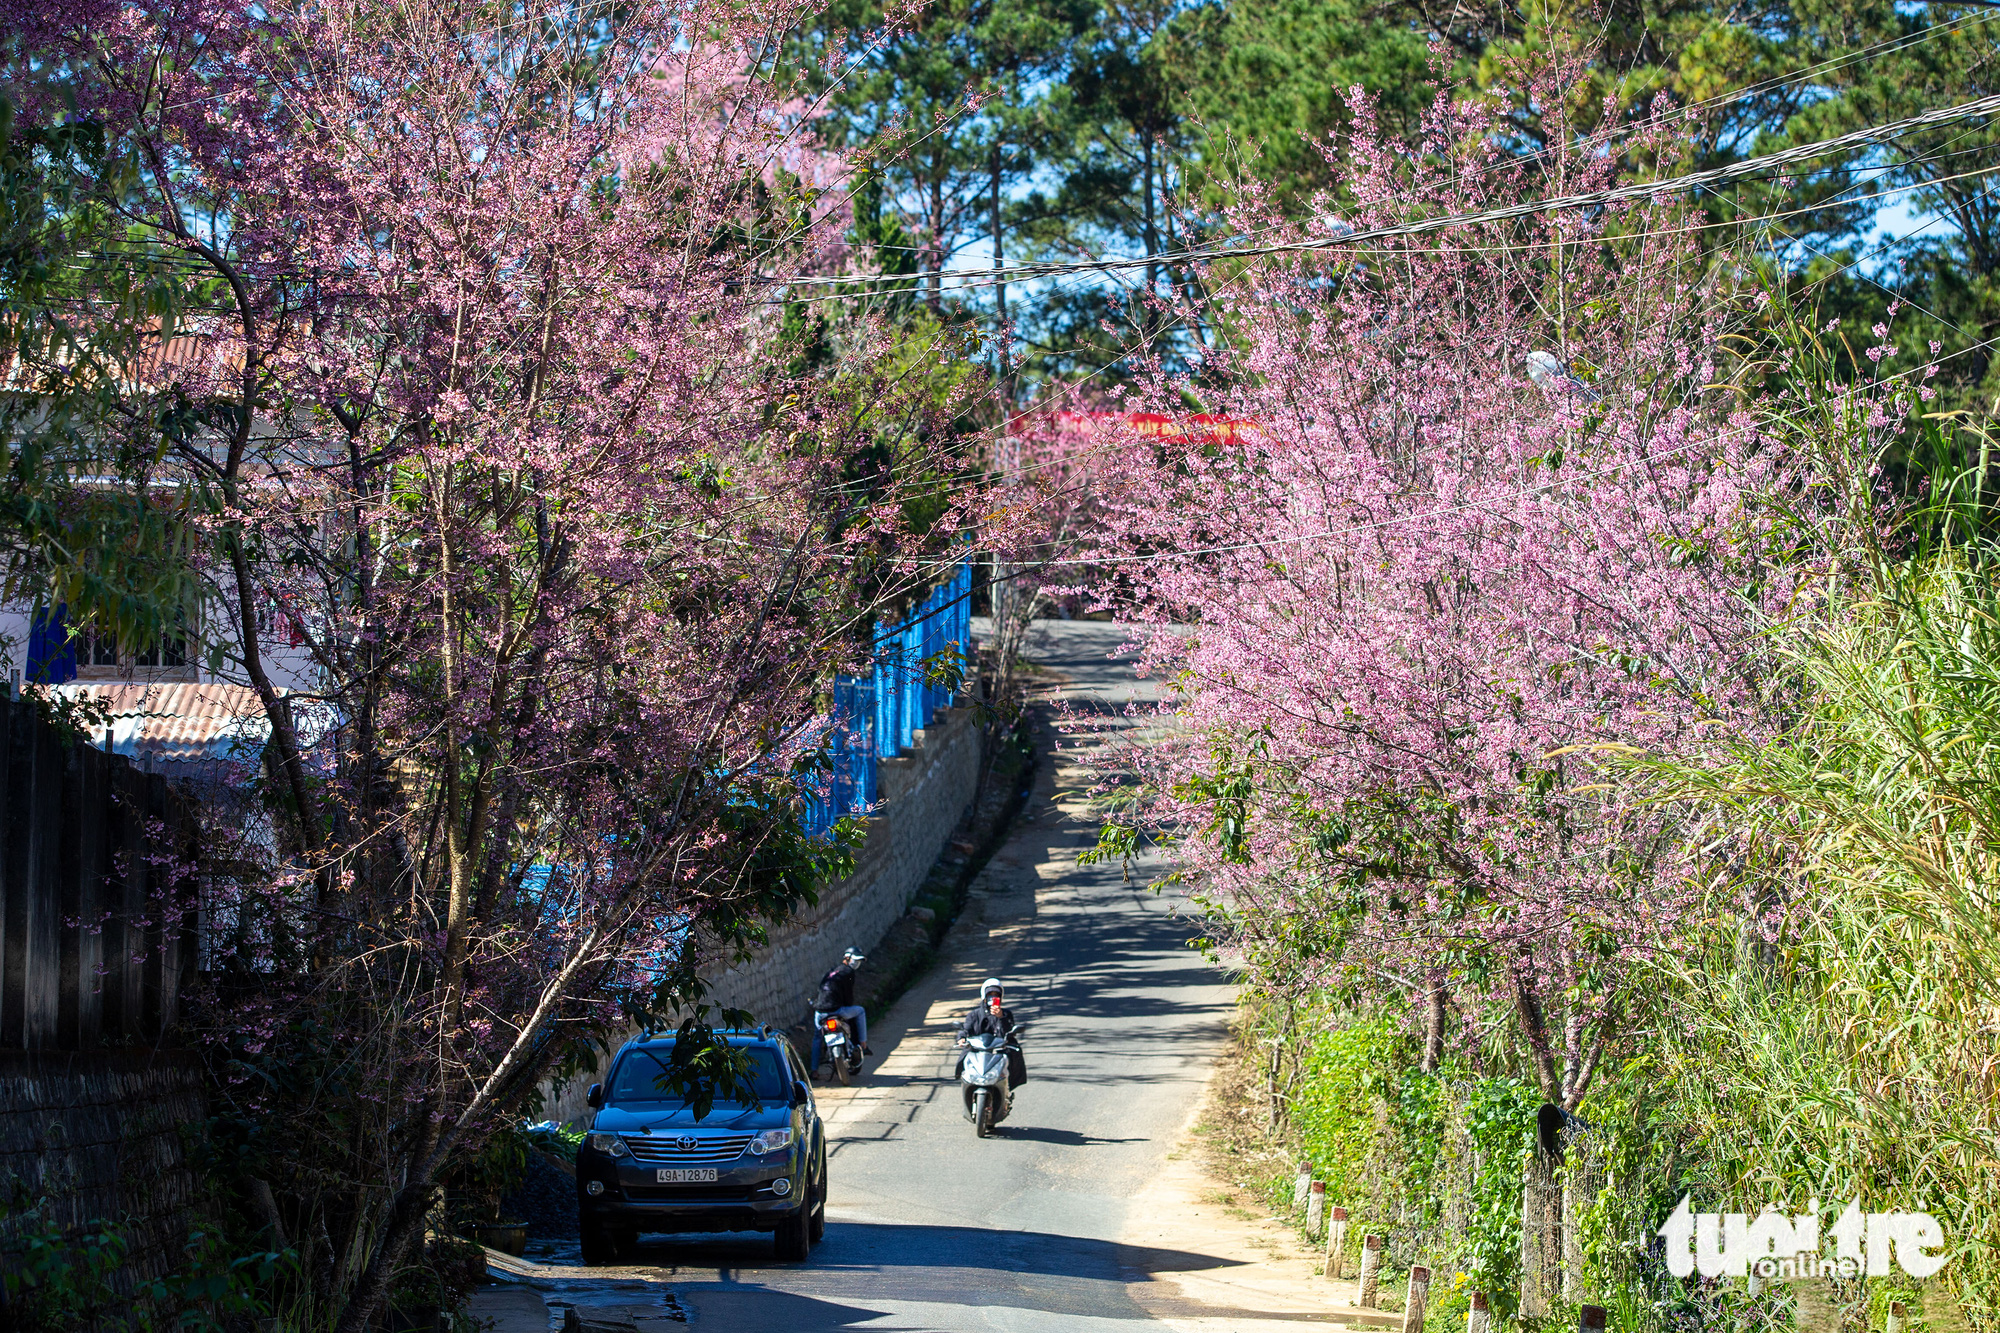 Blooming apricot trees along a street in Da Lat City, Lam Dong Province, Vietnam. Photo: Tuoi Tre